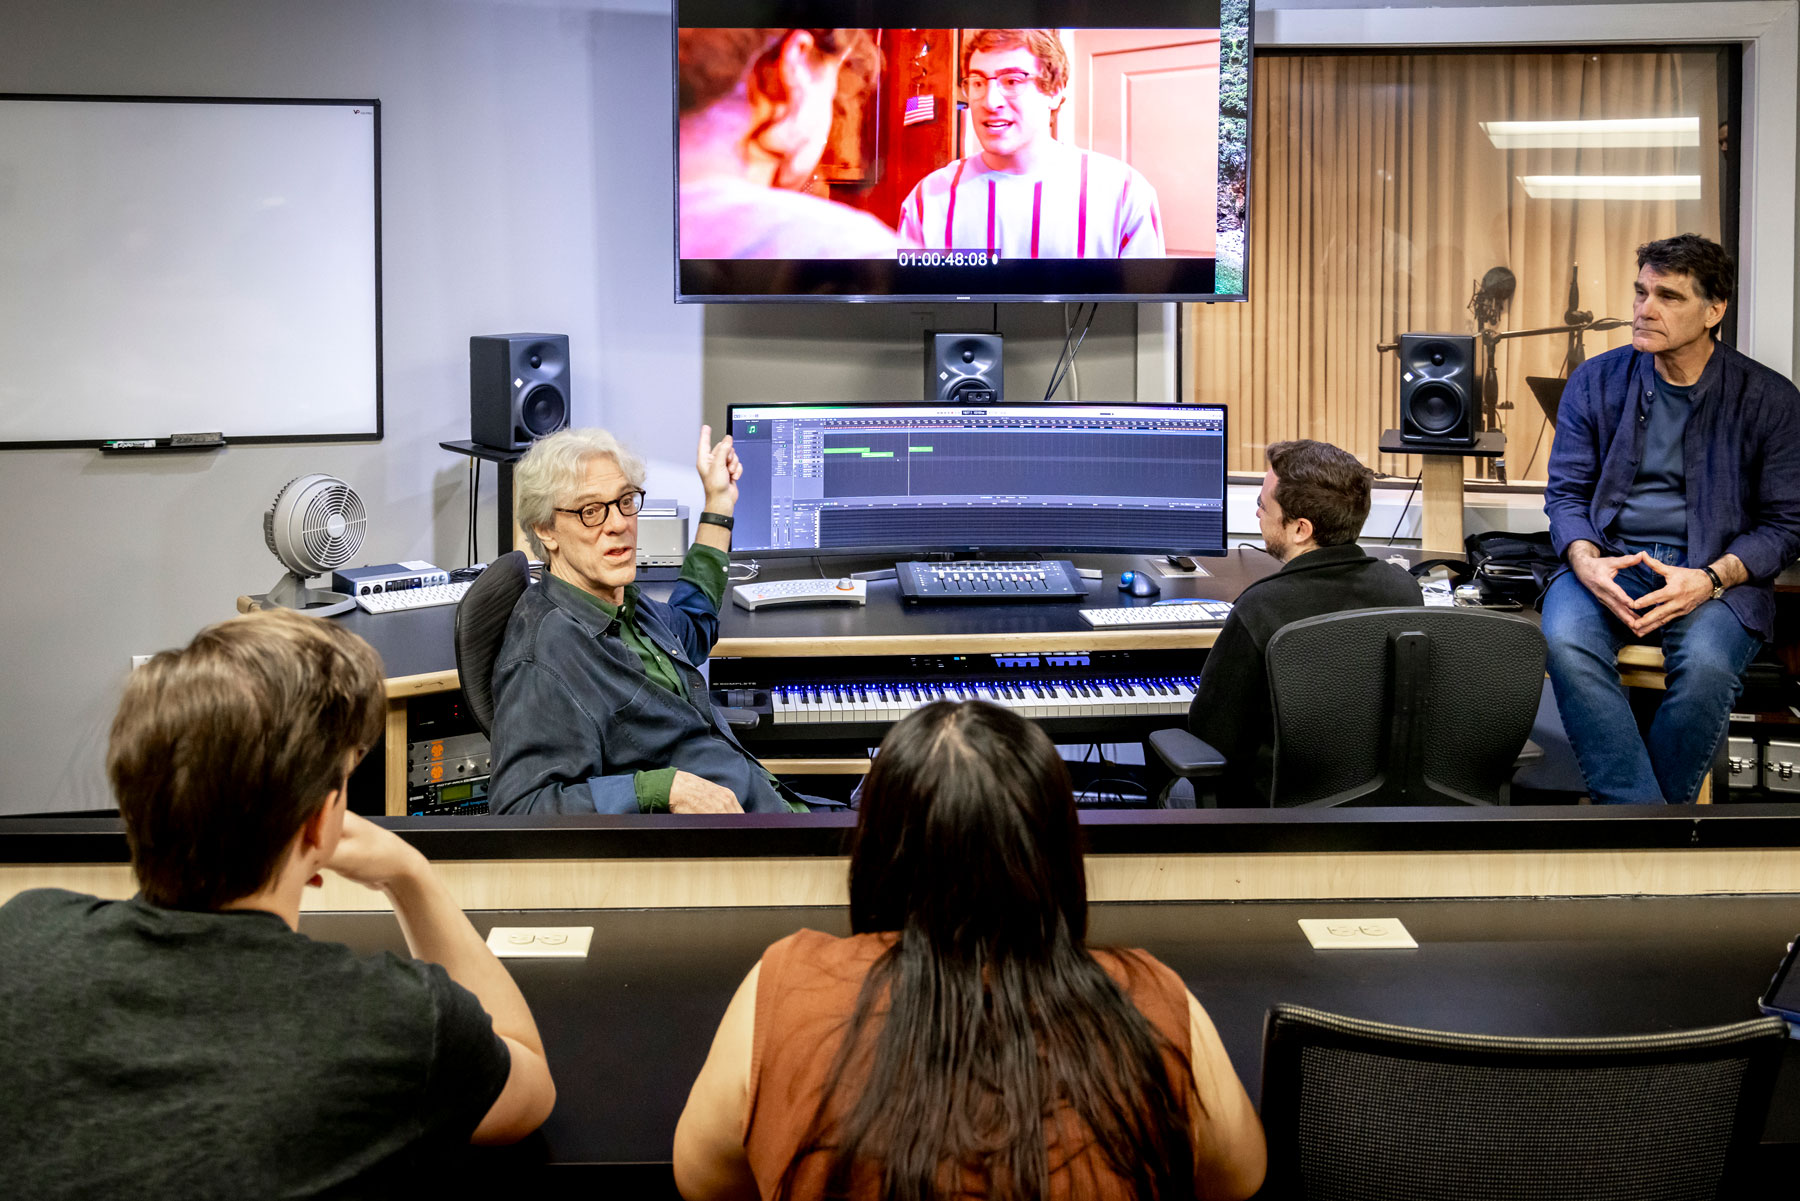 Students gather in Meadows new electronic recording studio for a film and game scoring class.